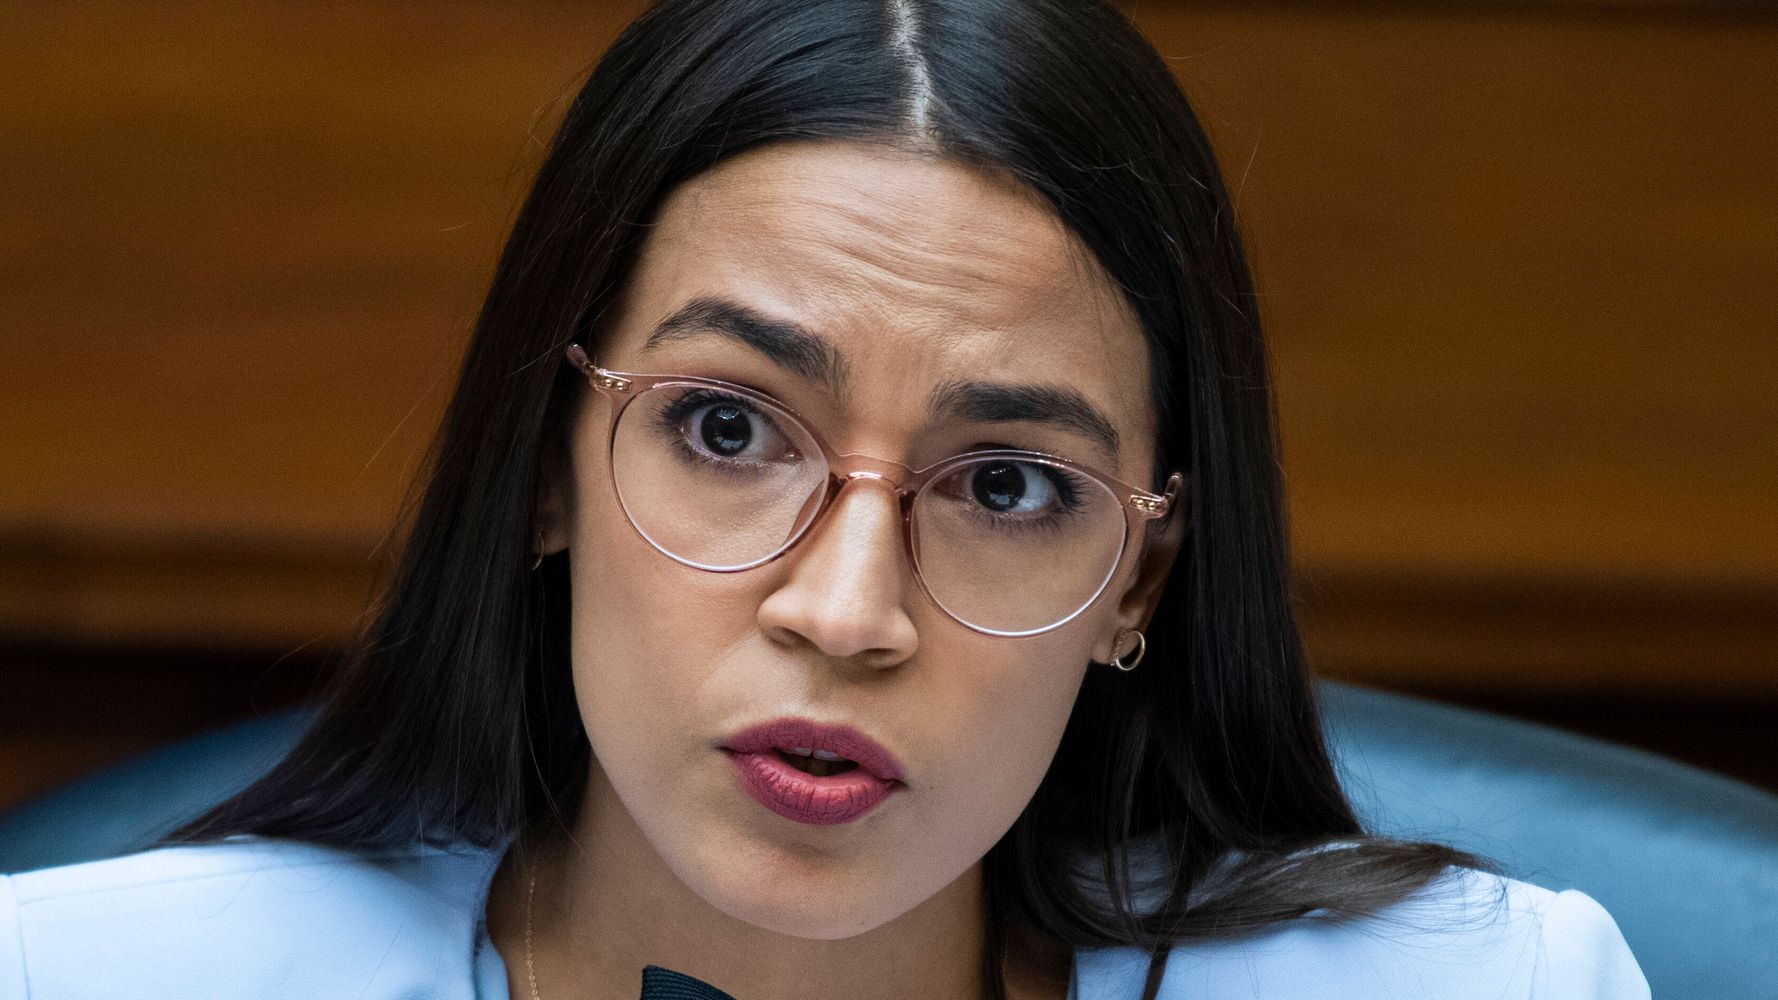 Alexandria Ocasio-Cortez Warns What To Look Out For From Trump Sycophants Now